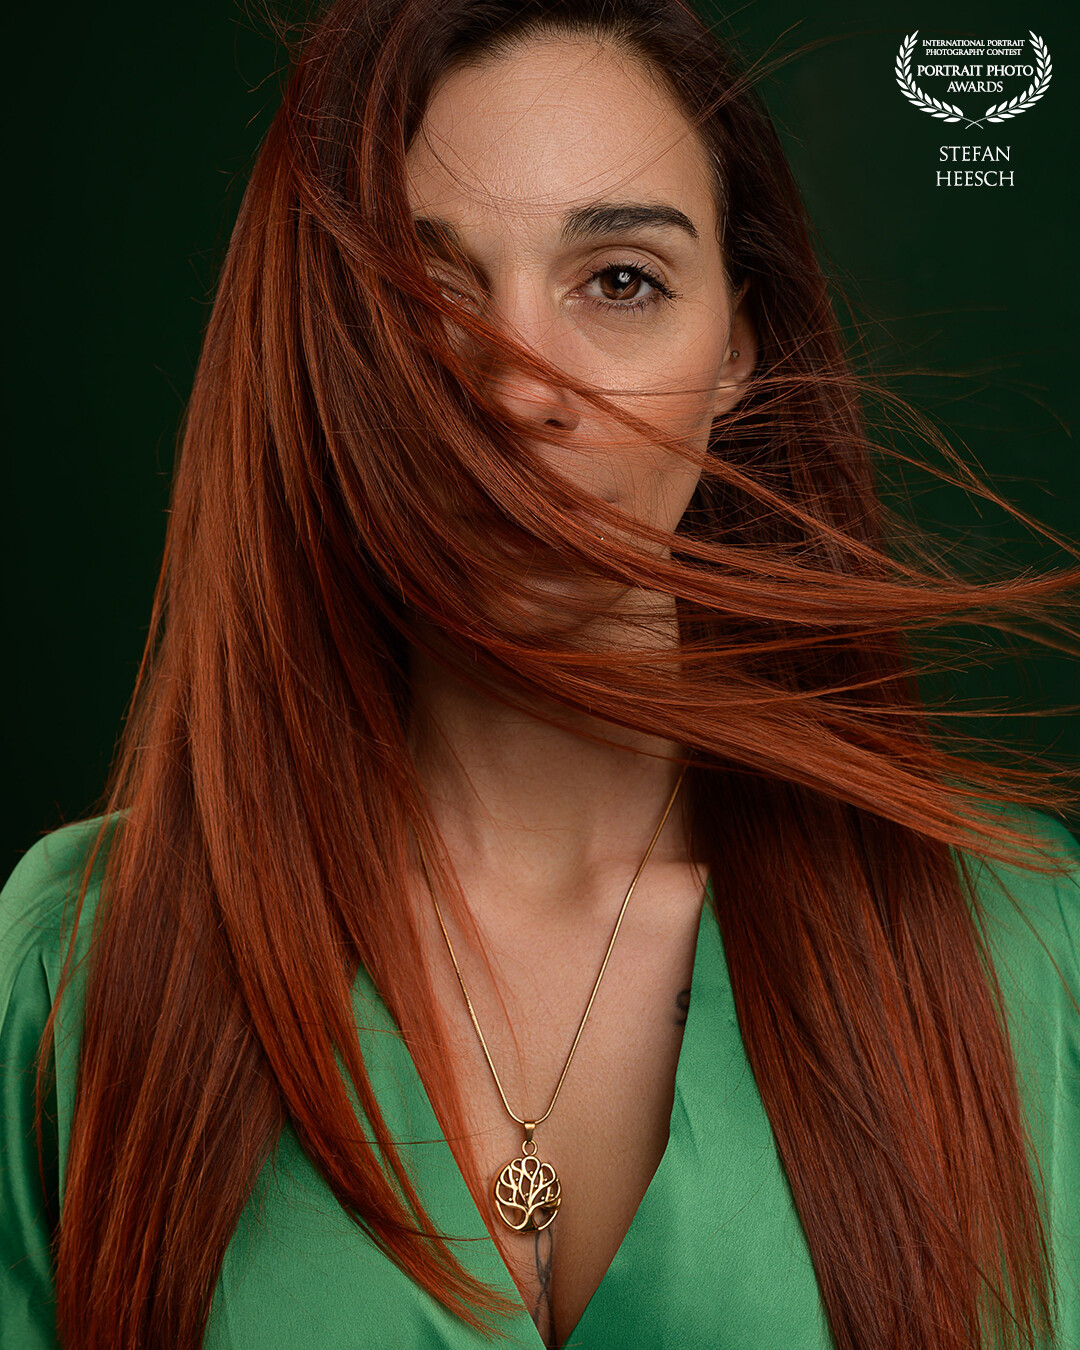 Played with colors - her red hair asked for something green - and added some wind: Simple half face portrait from Linda Anna @ladyly87